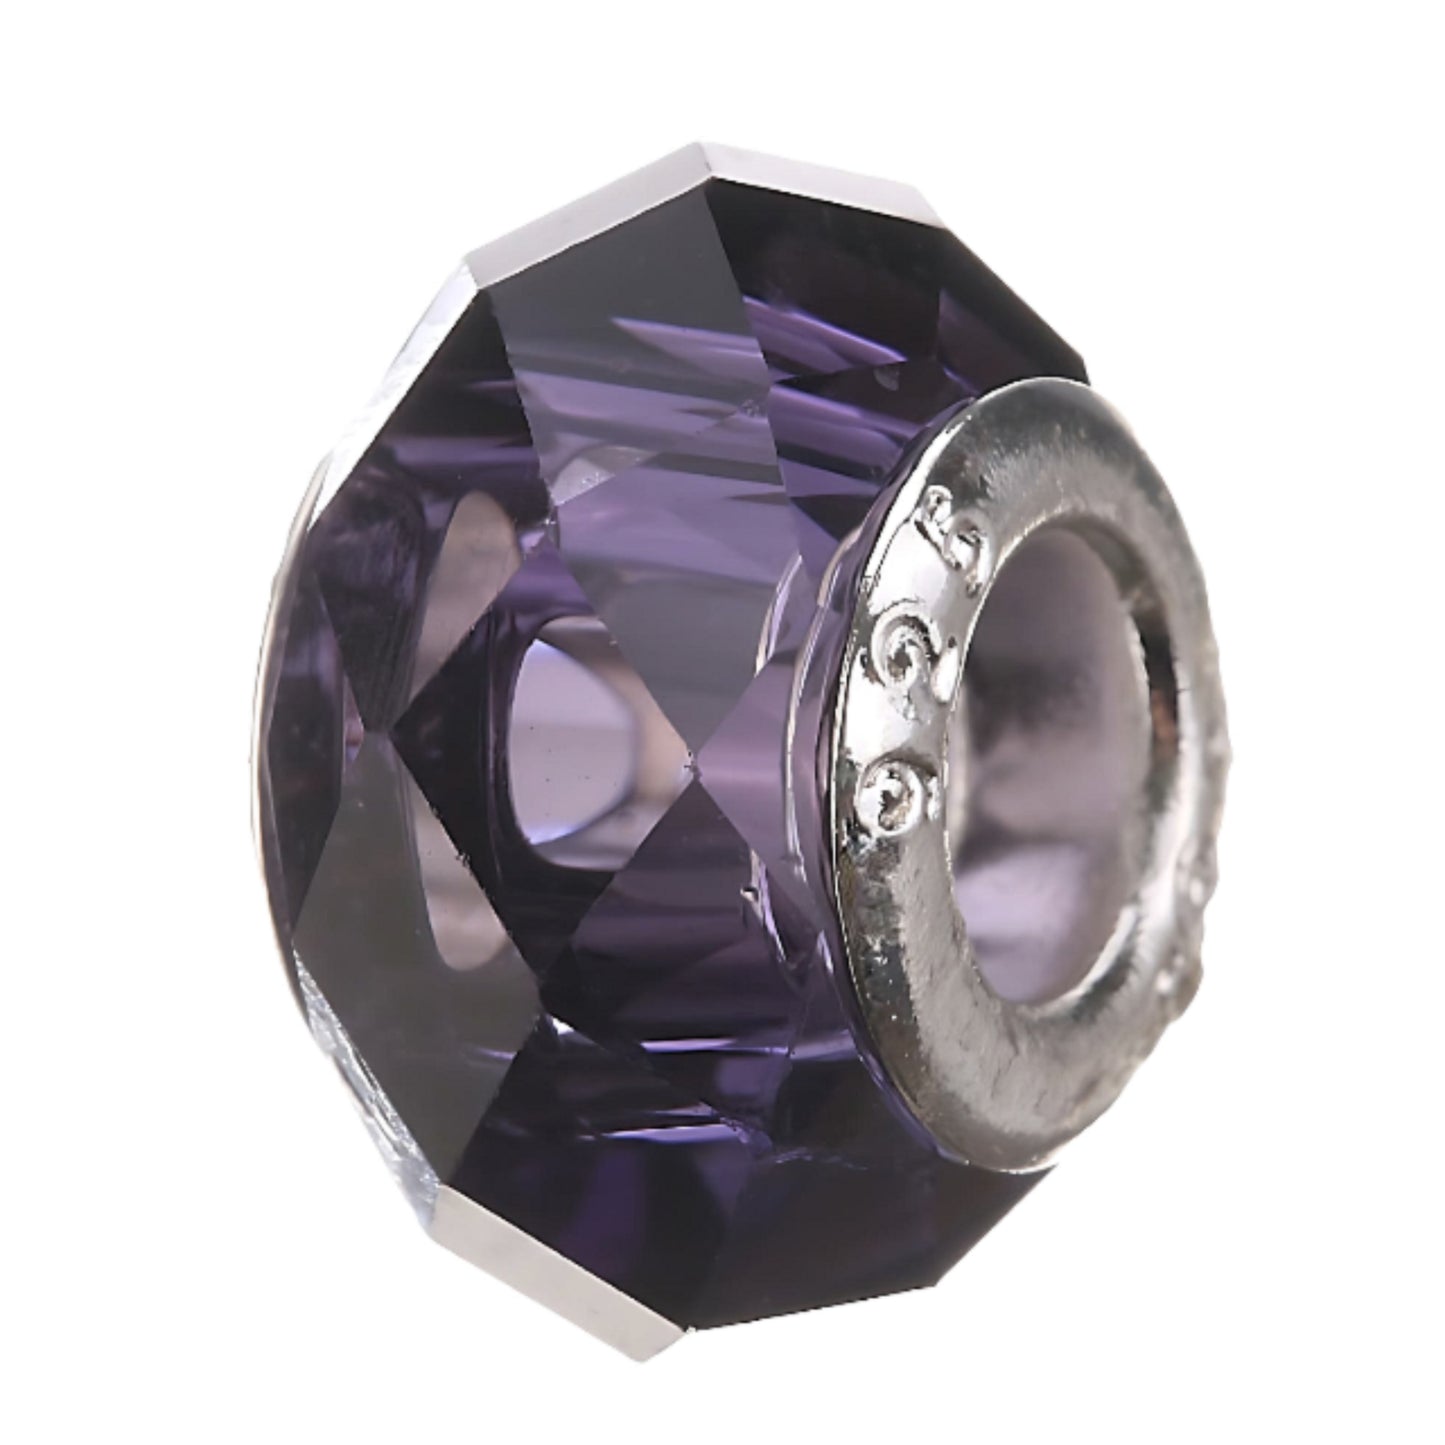 a faceted glass bead in purple color